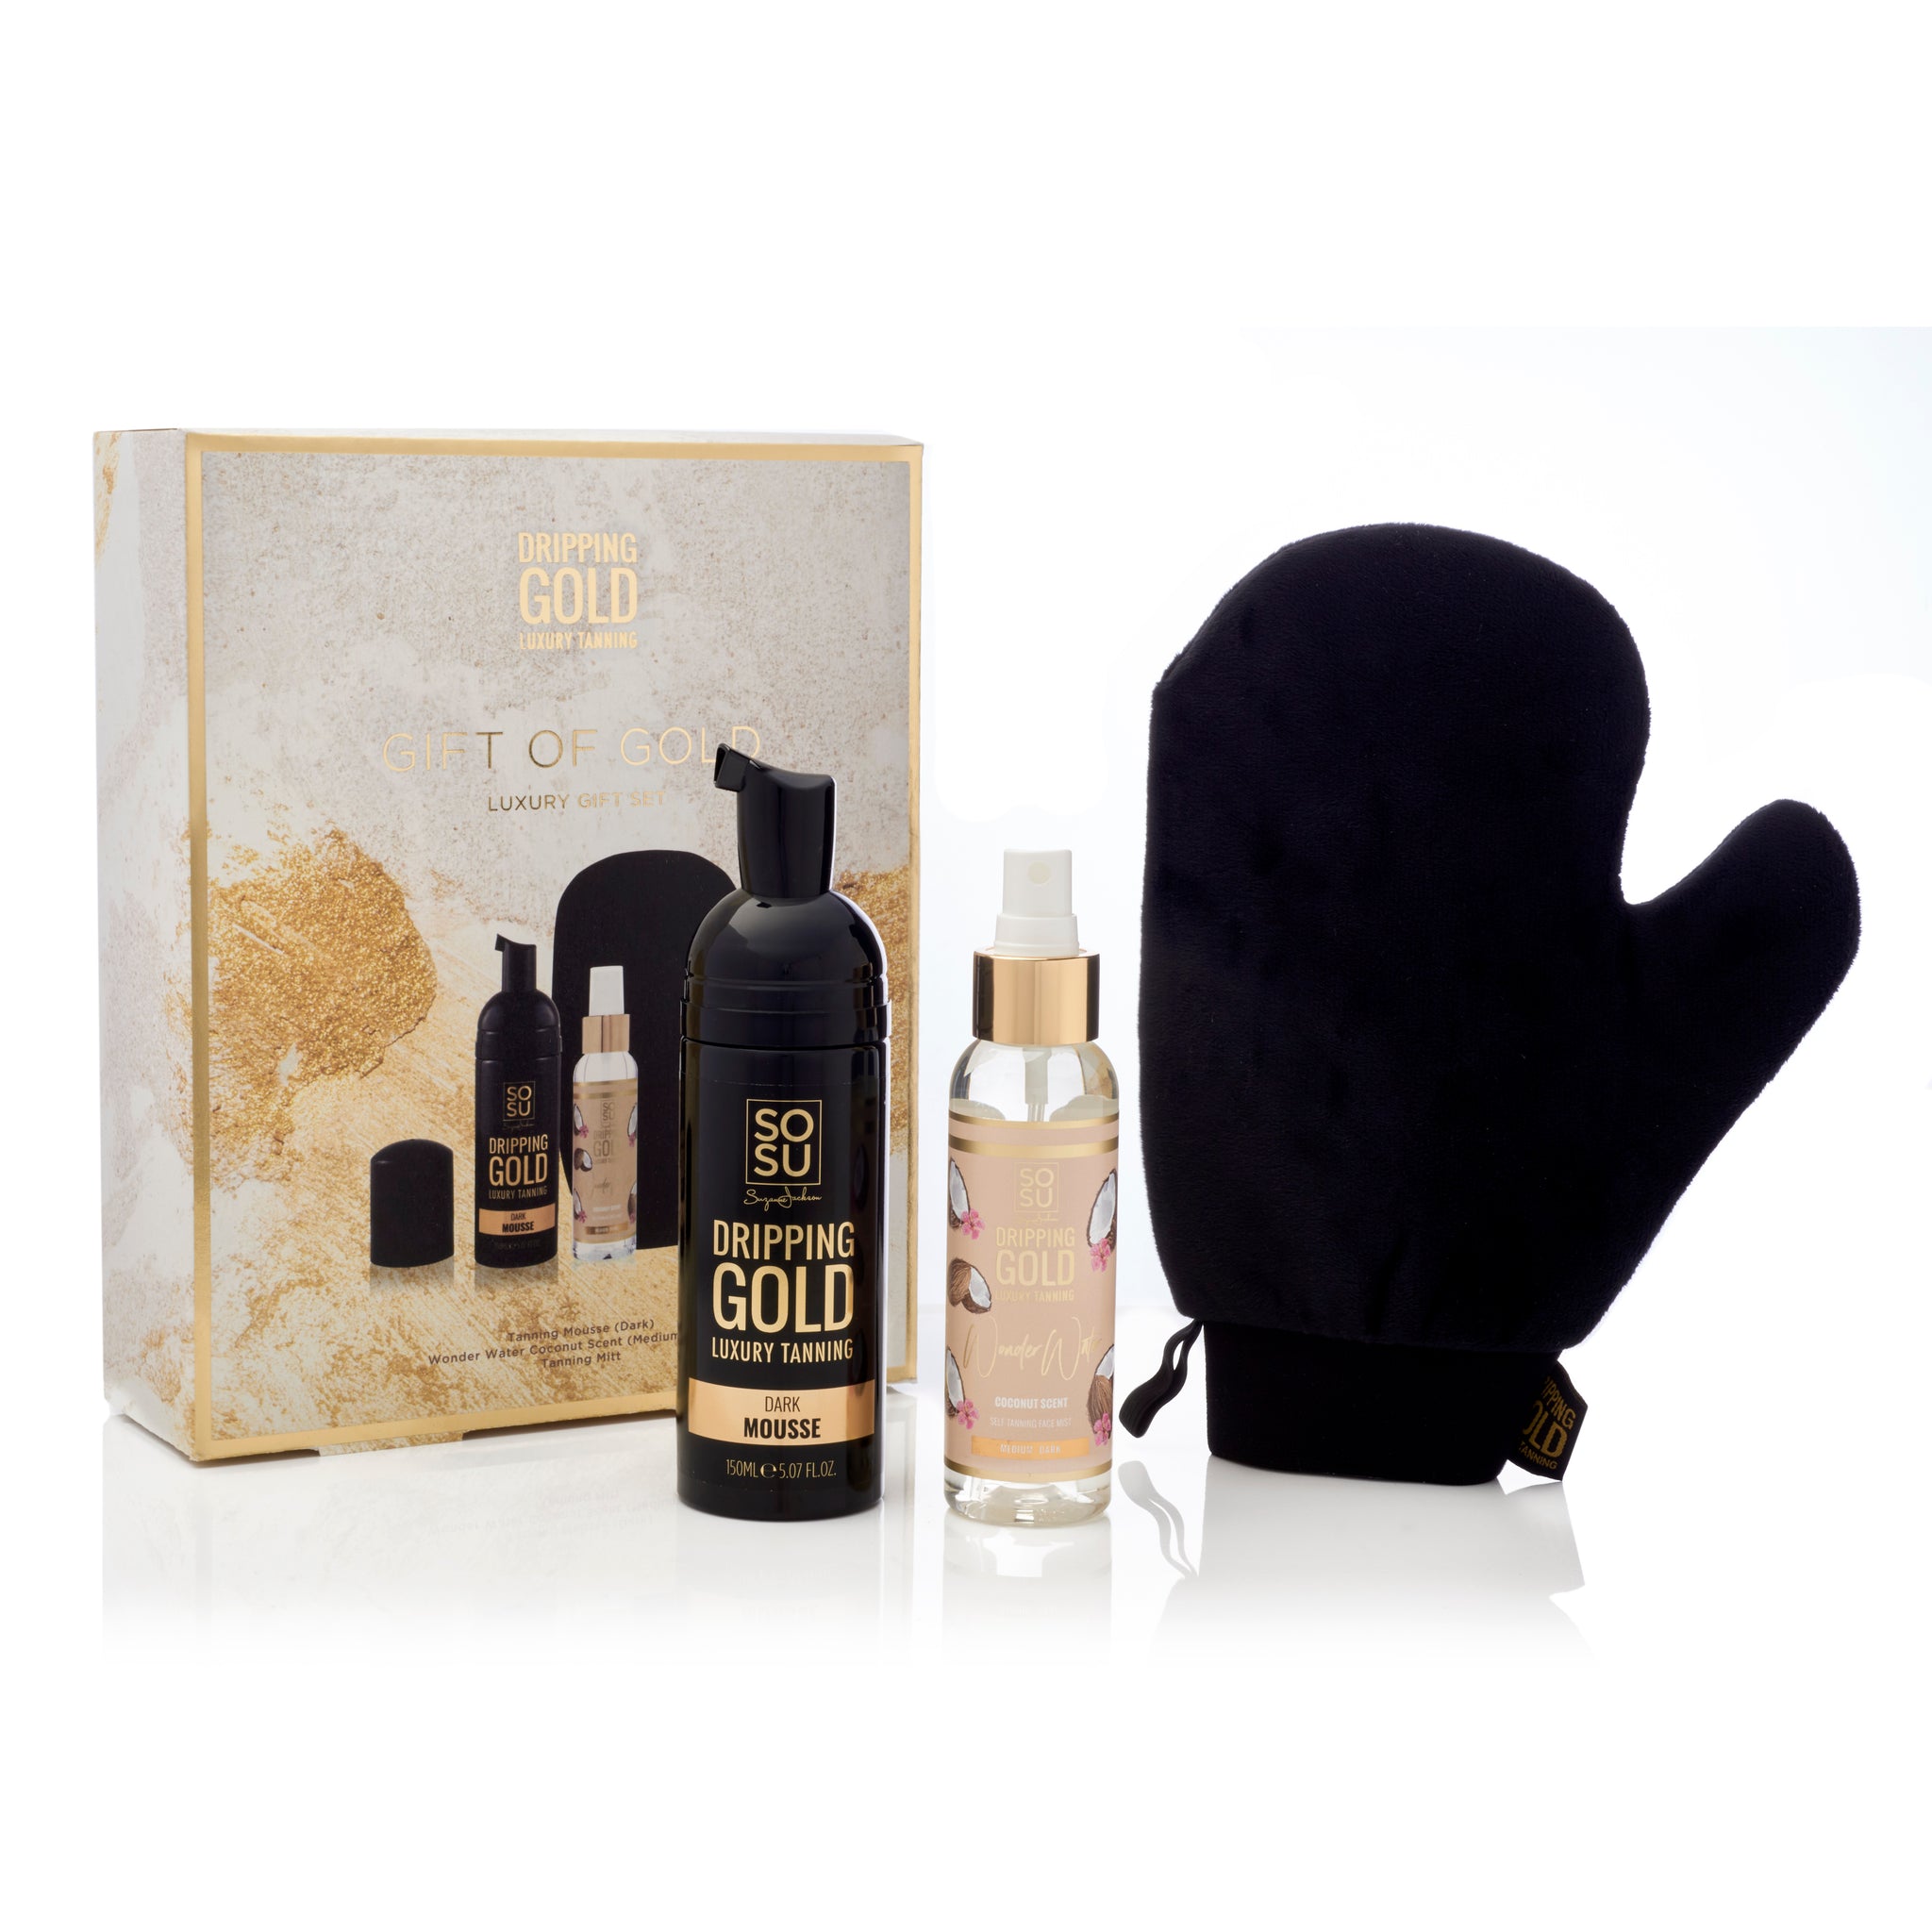 Dripping Gold Gift of Gold Tanning Gift Set. 20% OFF